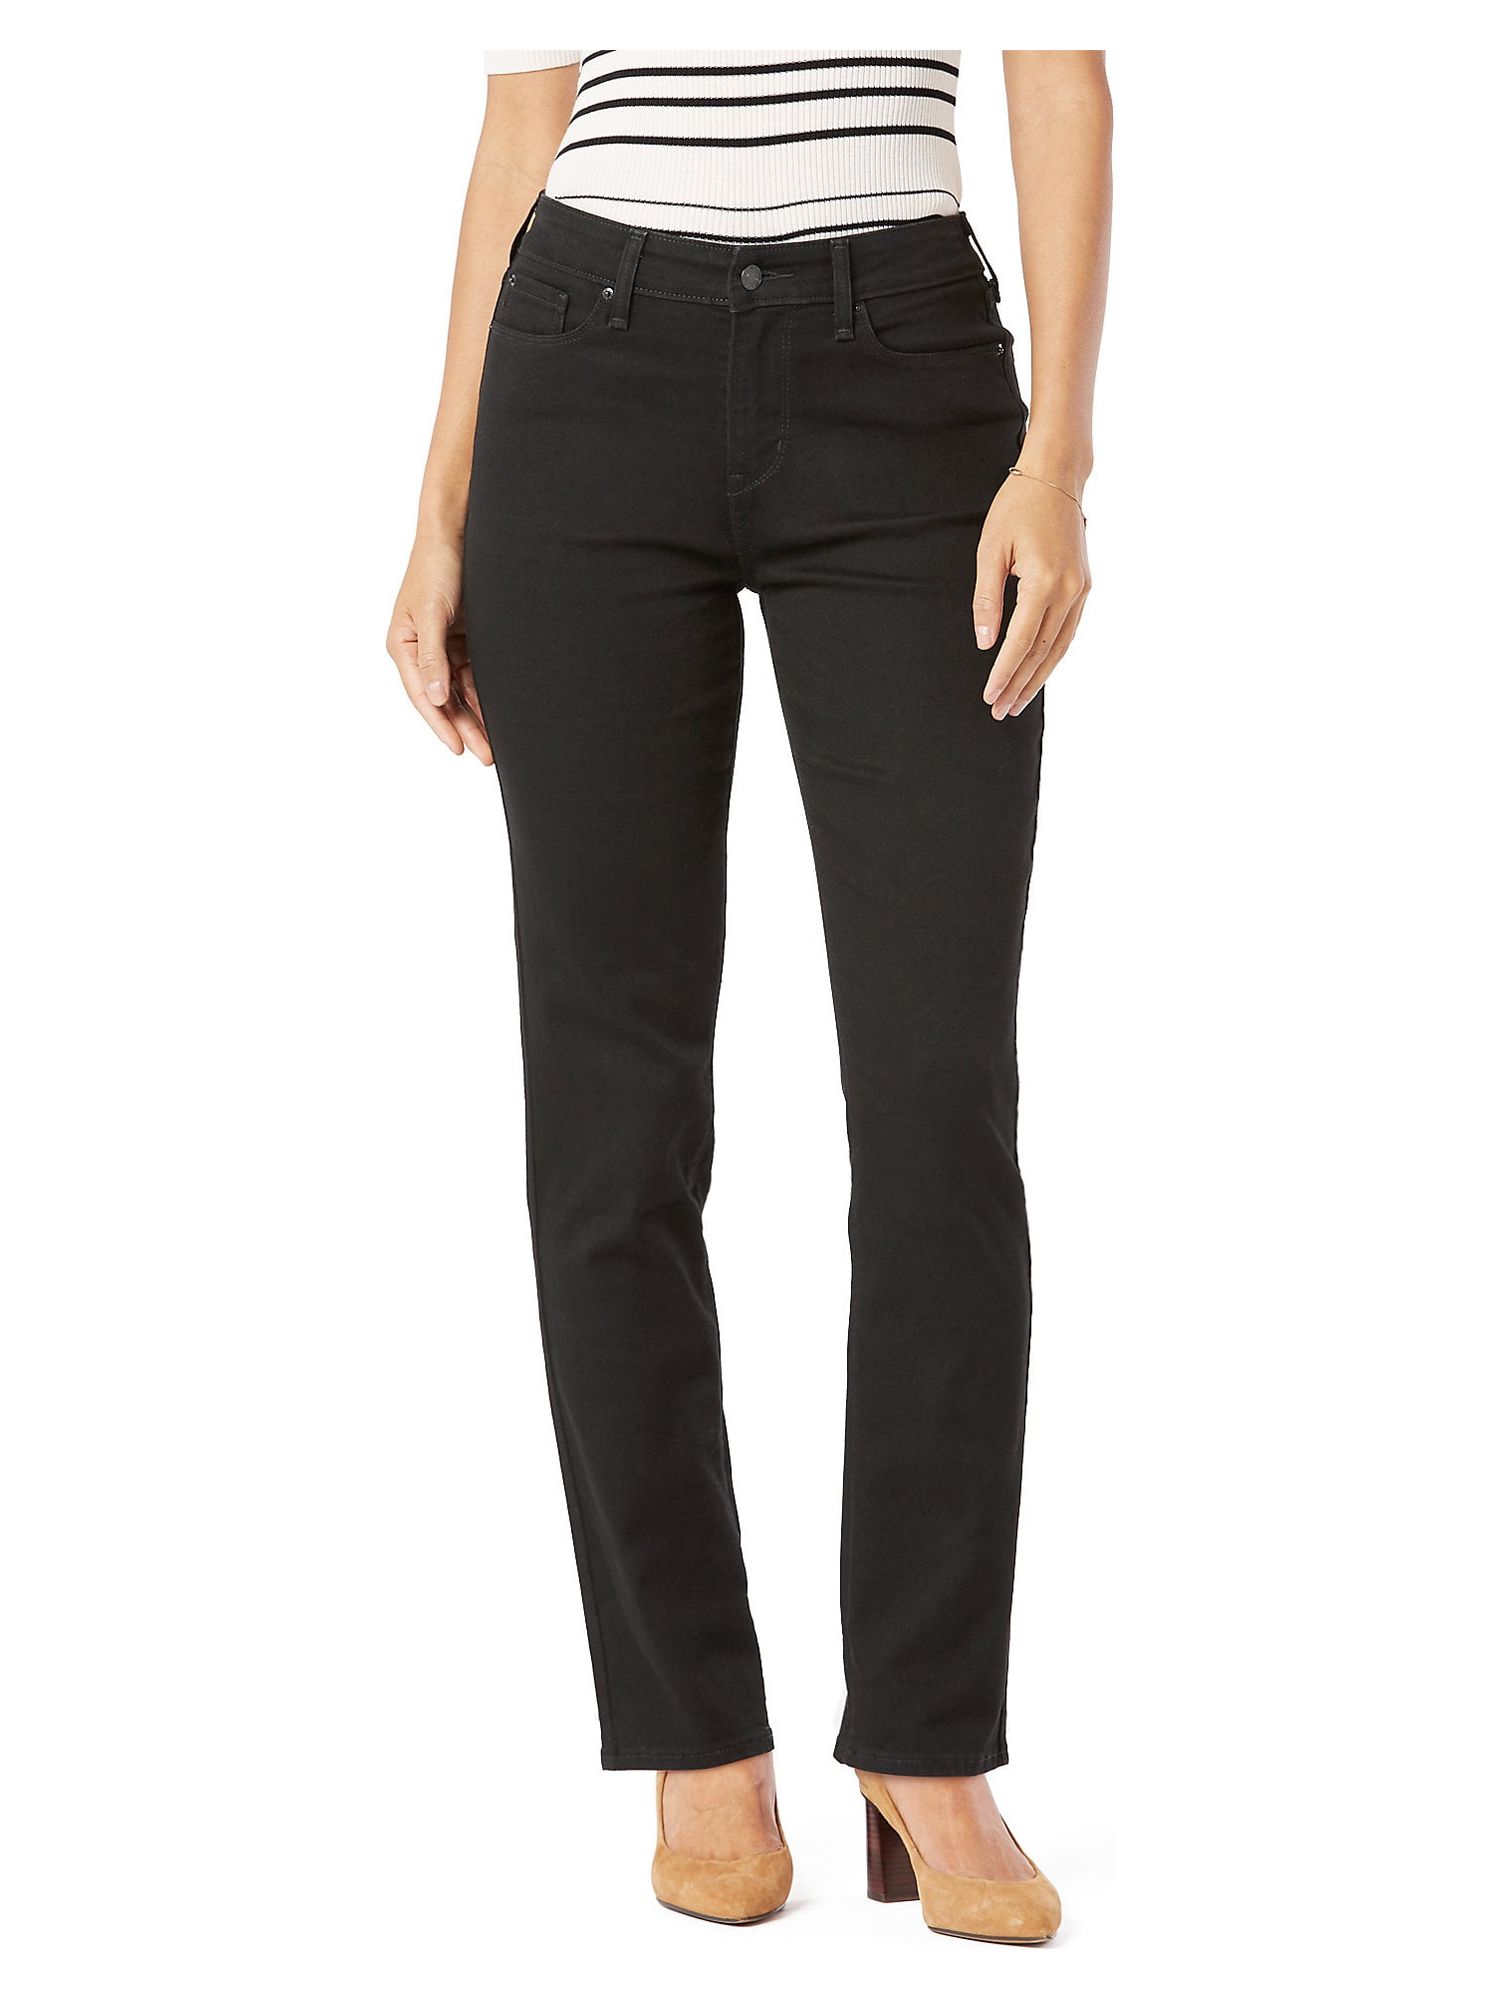 Signature by Levi Strauss & Co. Women's and Women's Plus Size Mid Rise Modern Straight Jeans, Sizes 2-28 - image 1 of 5